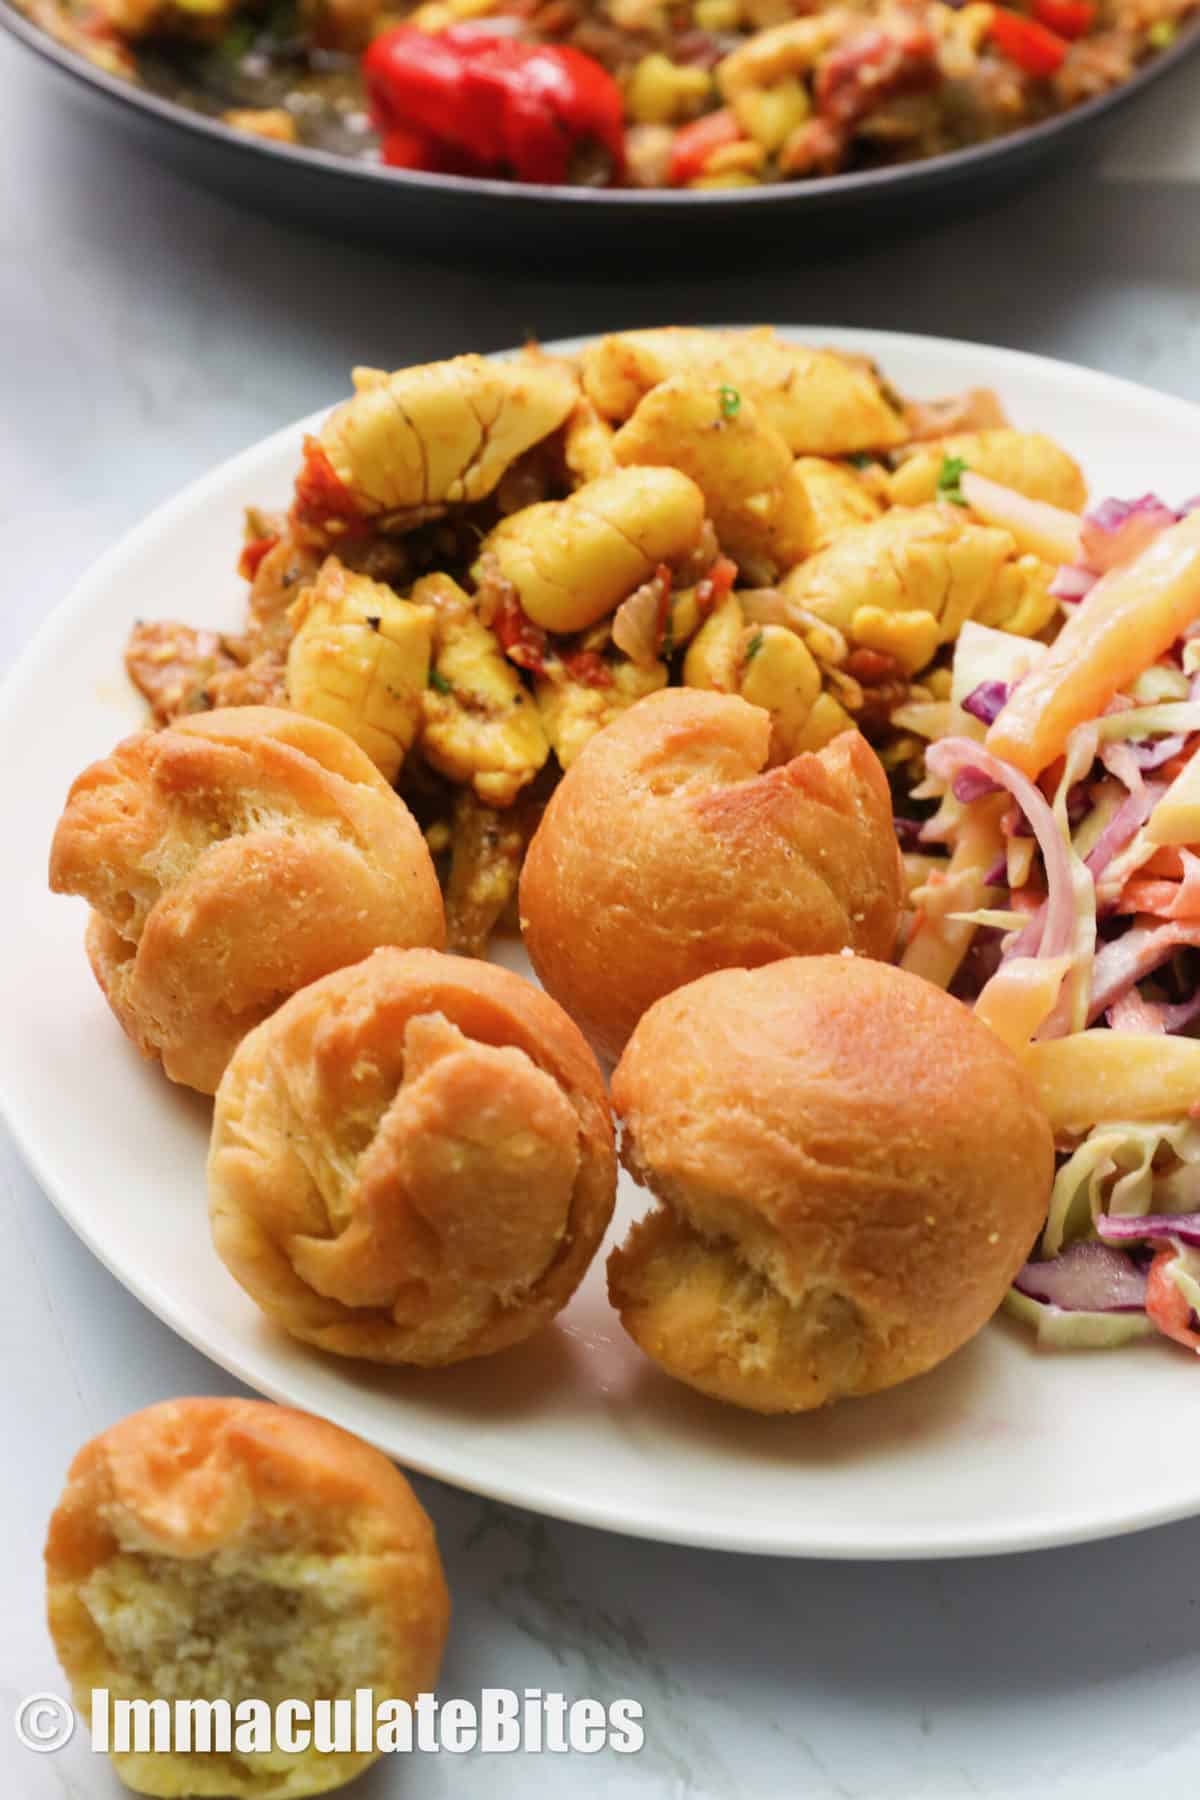 Jamaican Fried Dumplings with mango coleslaw and ackee with saltfish